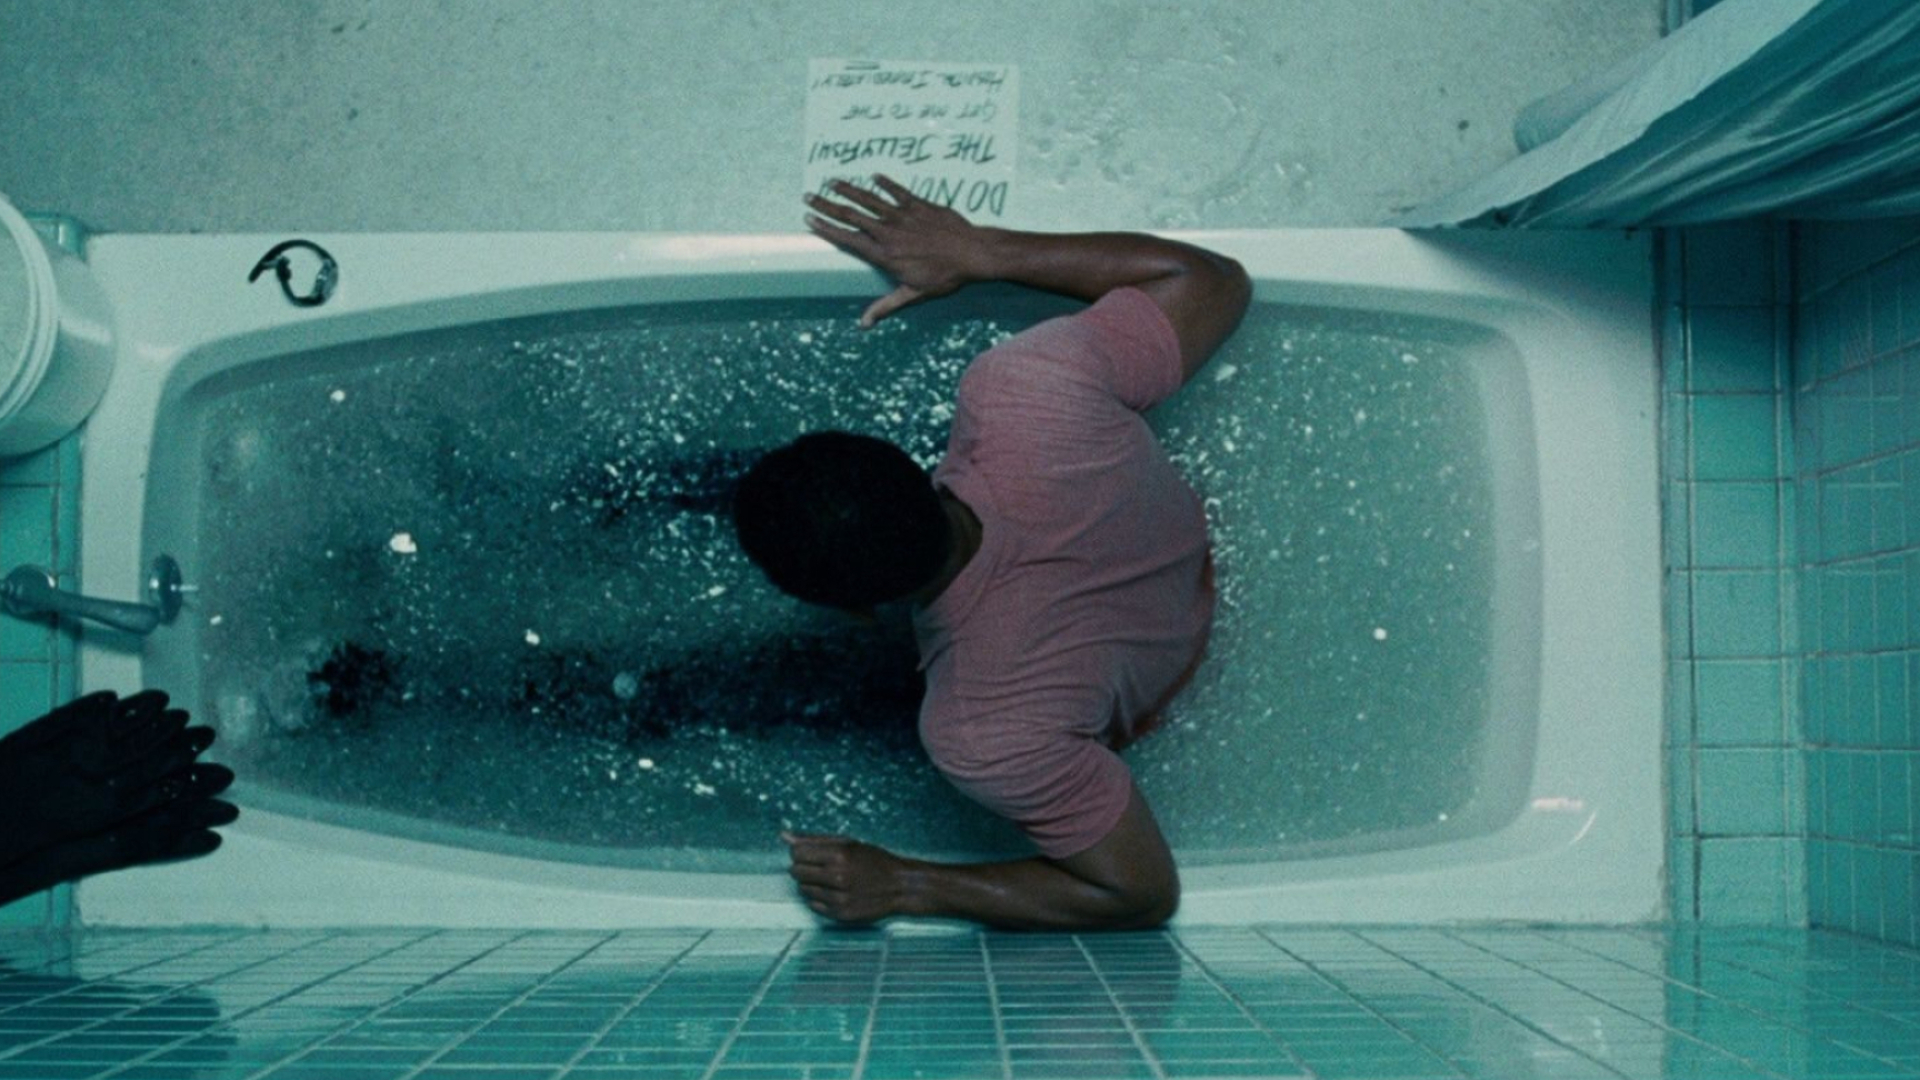 Seven Pounds, Redemption quest, Life-changing acts, Emotional journey, 1920x1080 Full HD Desktop